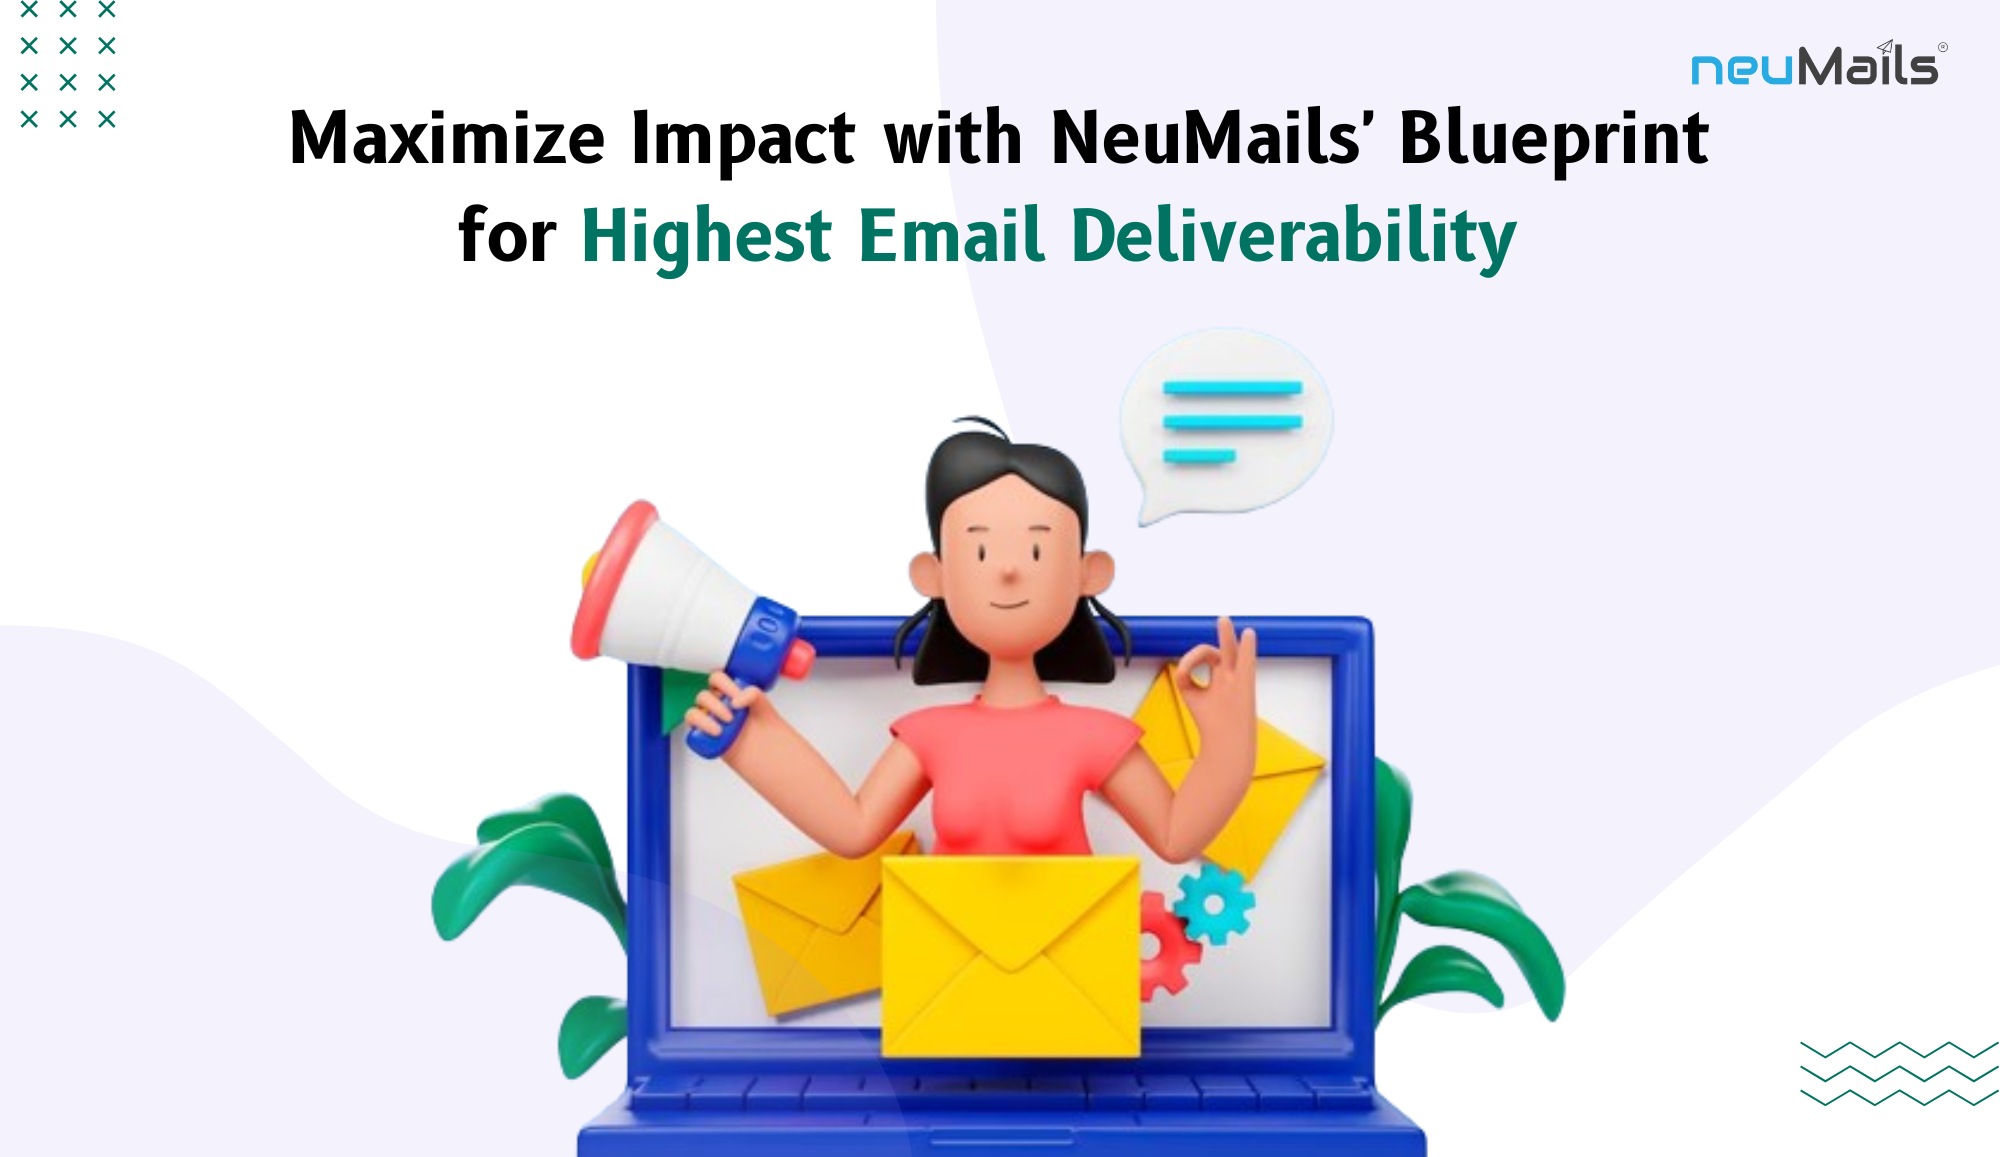 high email deliverability with neumails